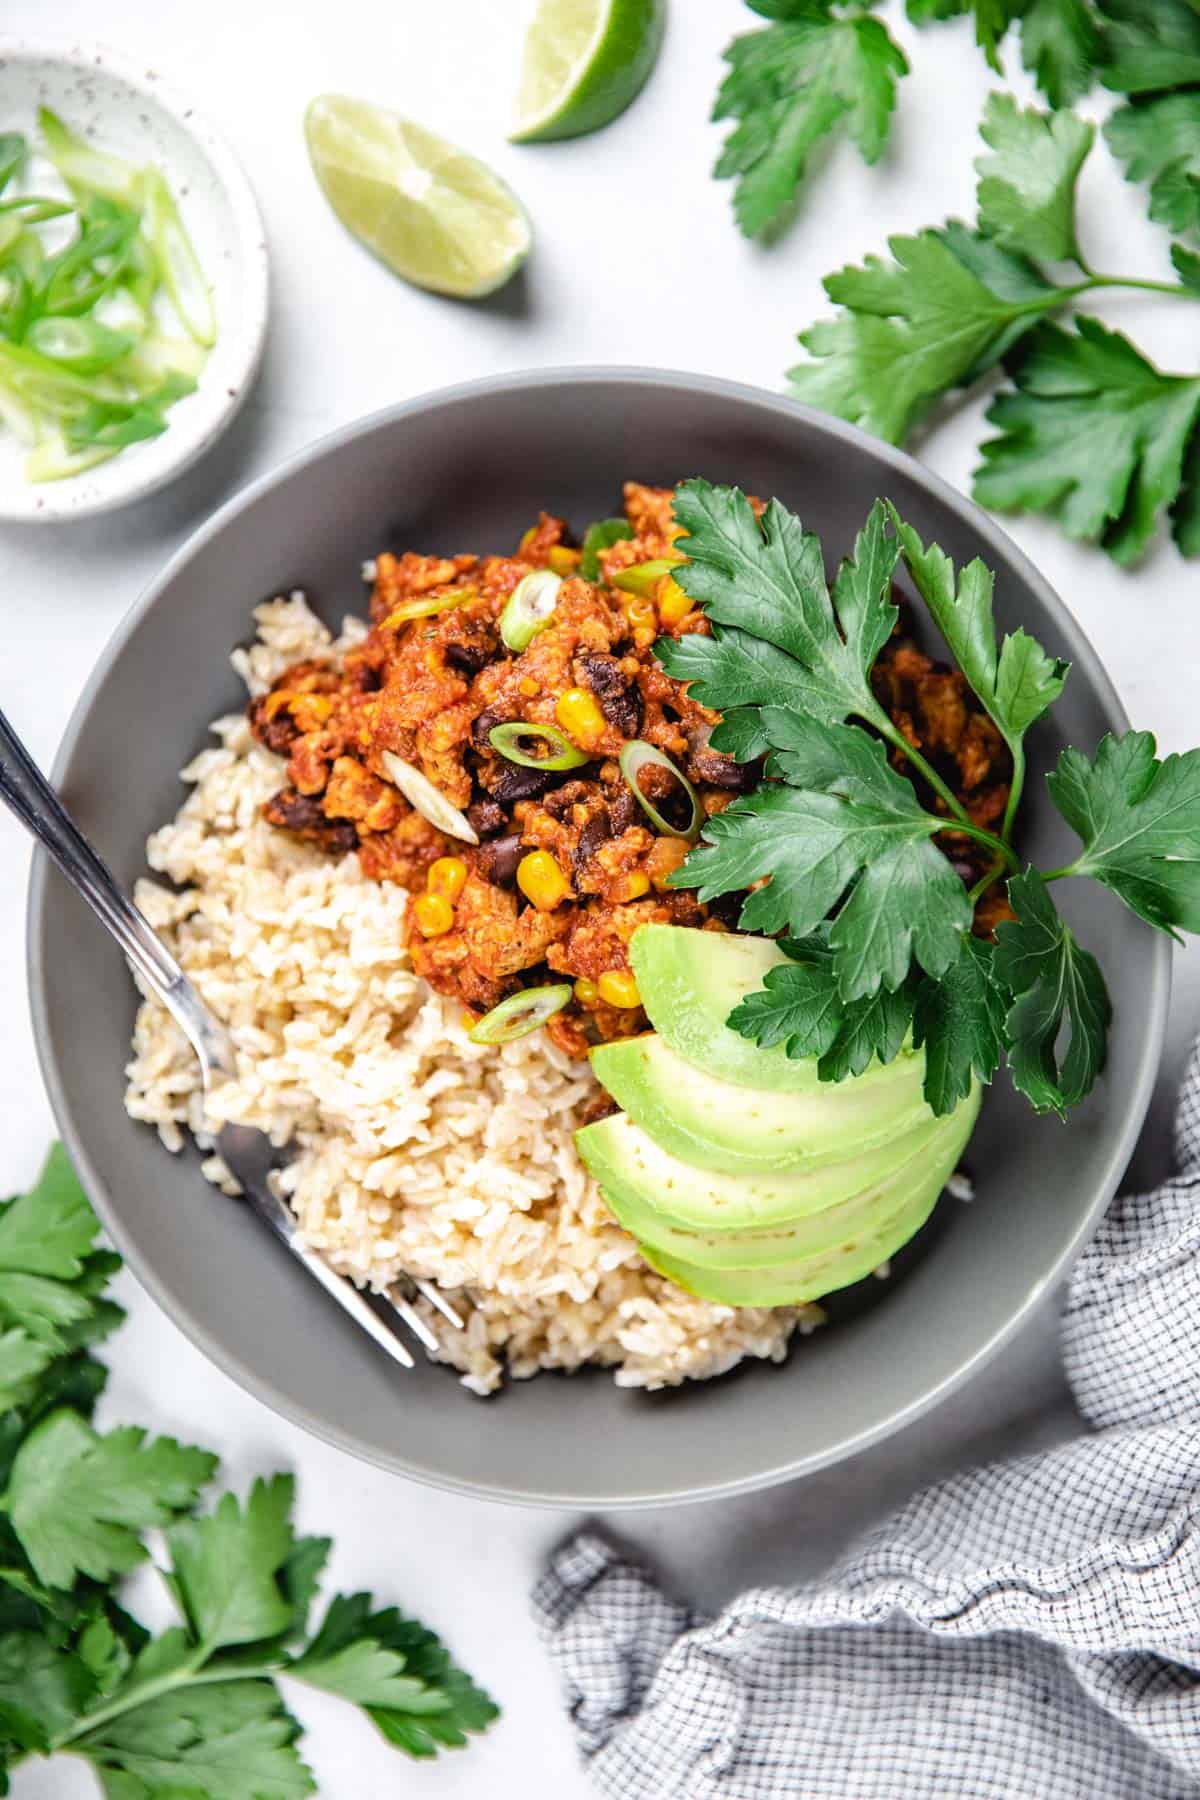 Turkey taco skillet with brown rice, topped with avocado and cilantro.